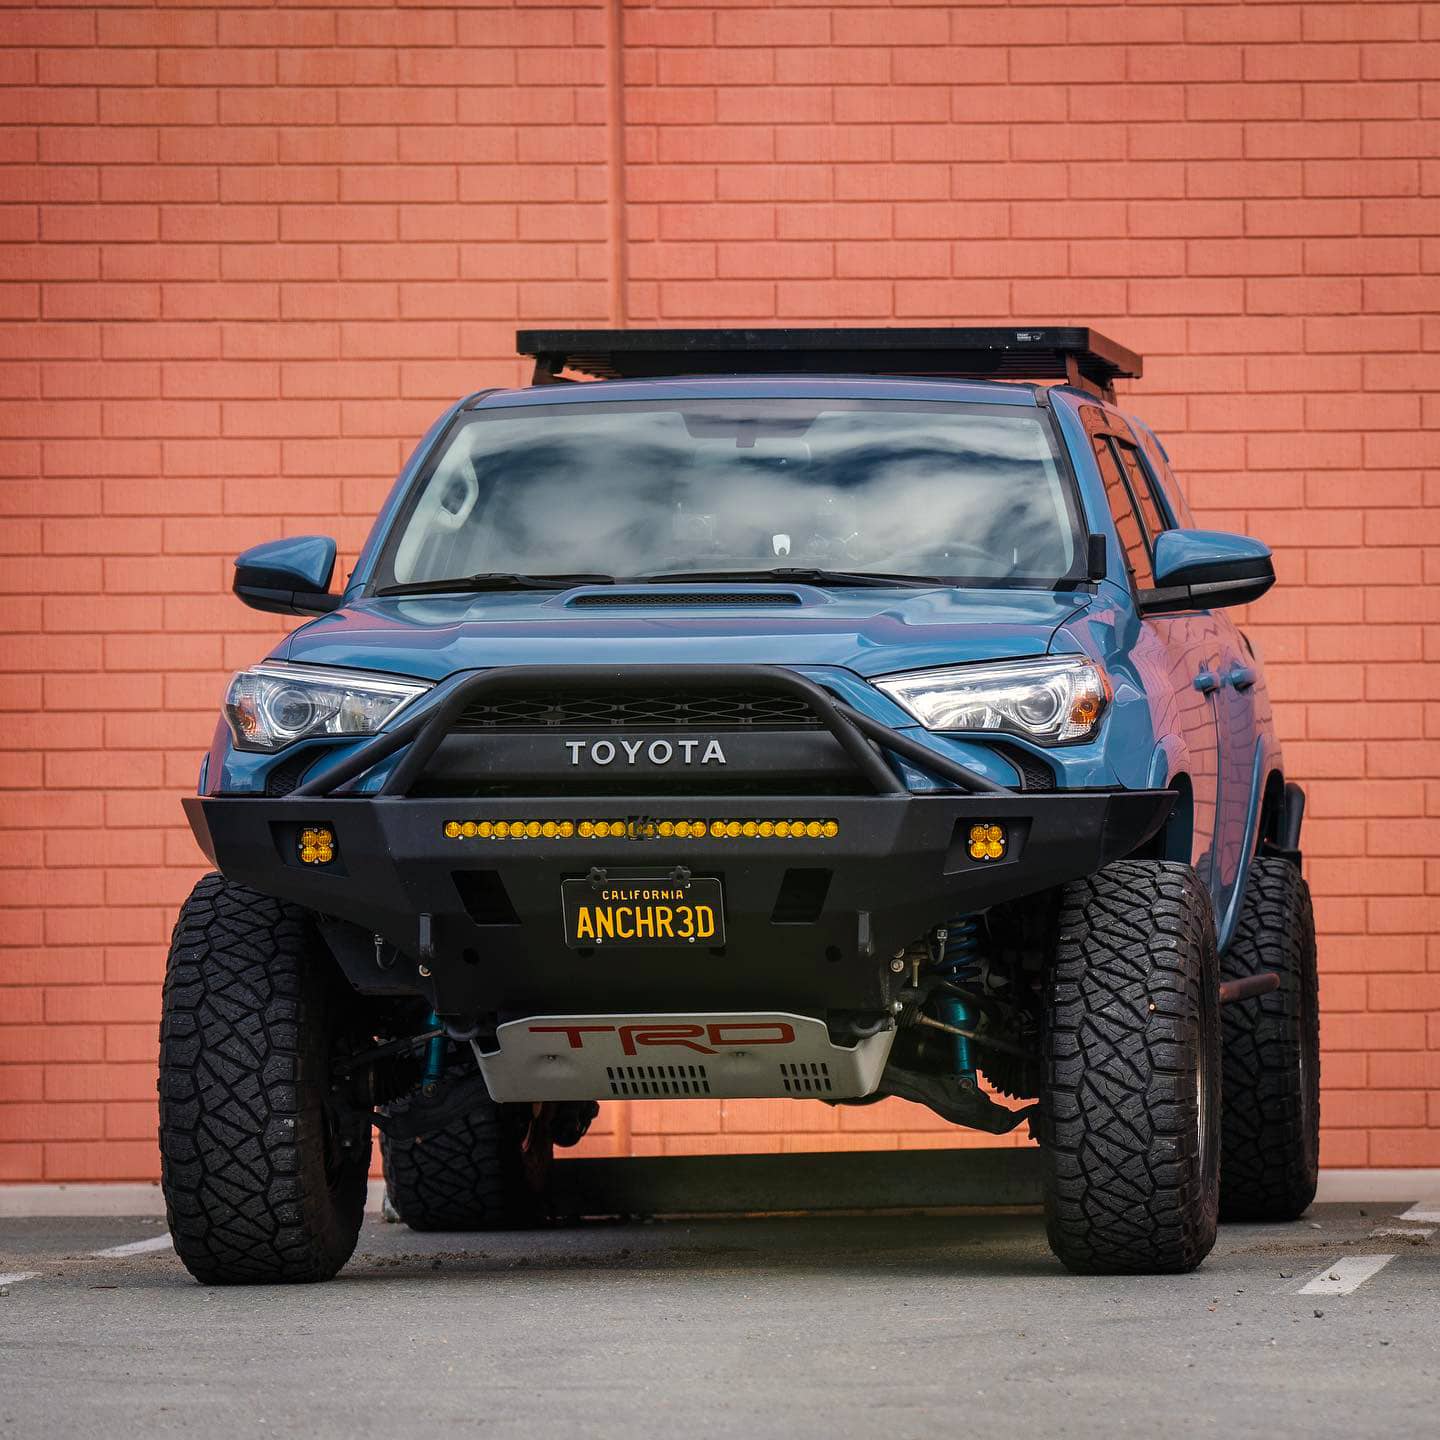 Lifted Toyota 4Runner - best mid size off-road SUV